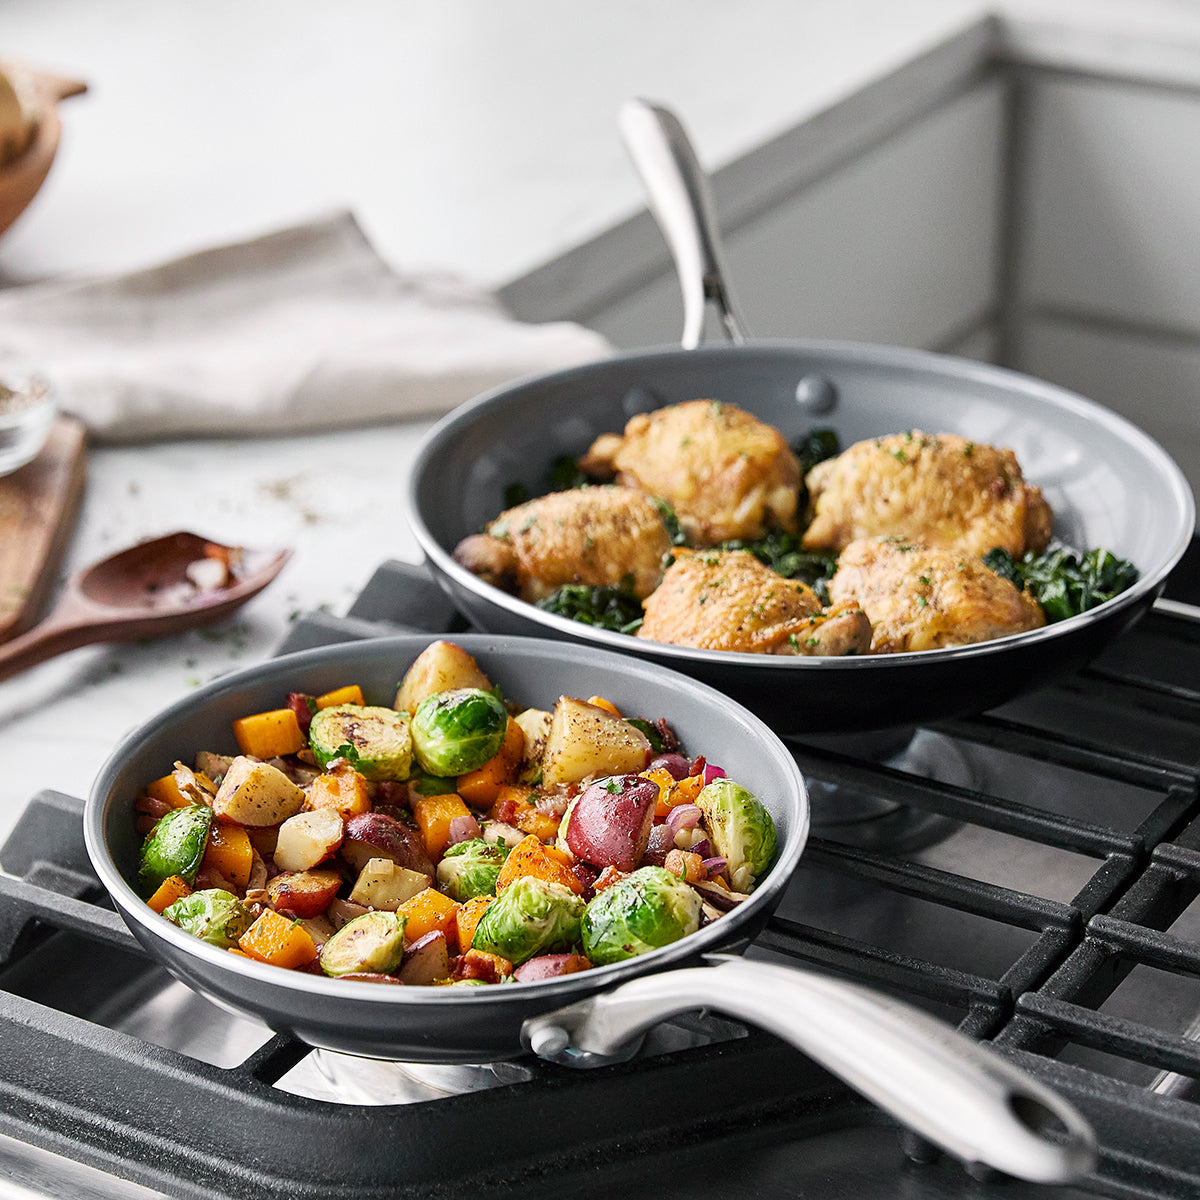 Southern Living by GreenPan Ceramic Nonstick Tri-ply Stainless Steel  12-Piece Cookware Set